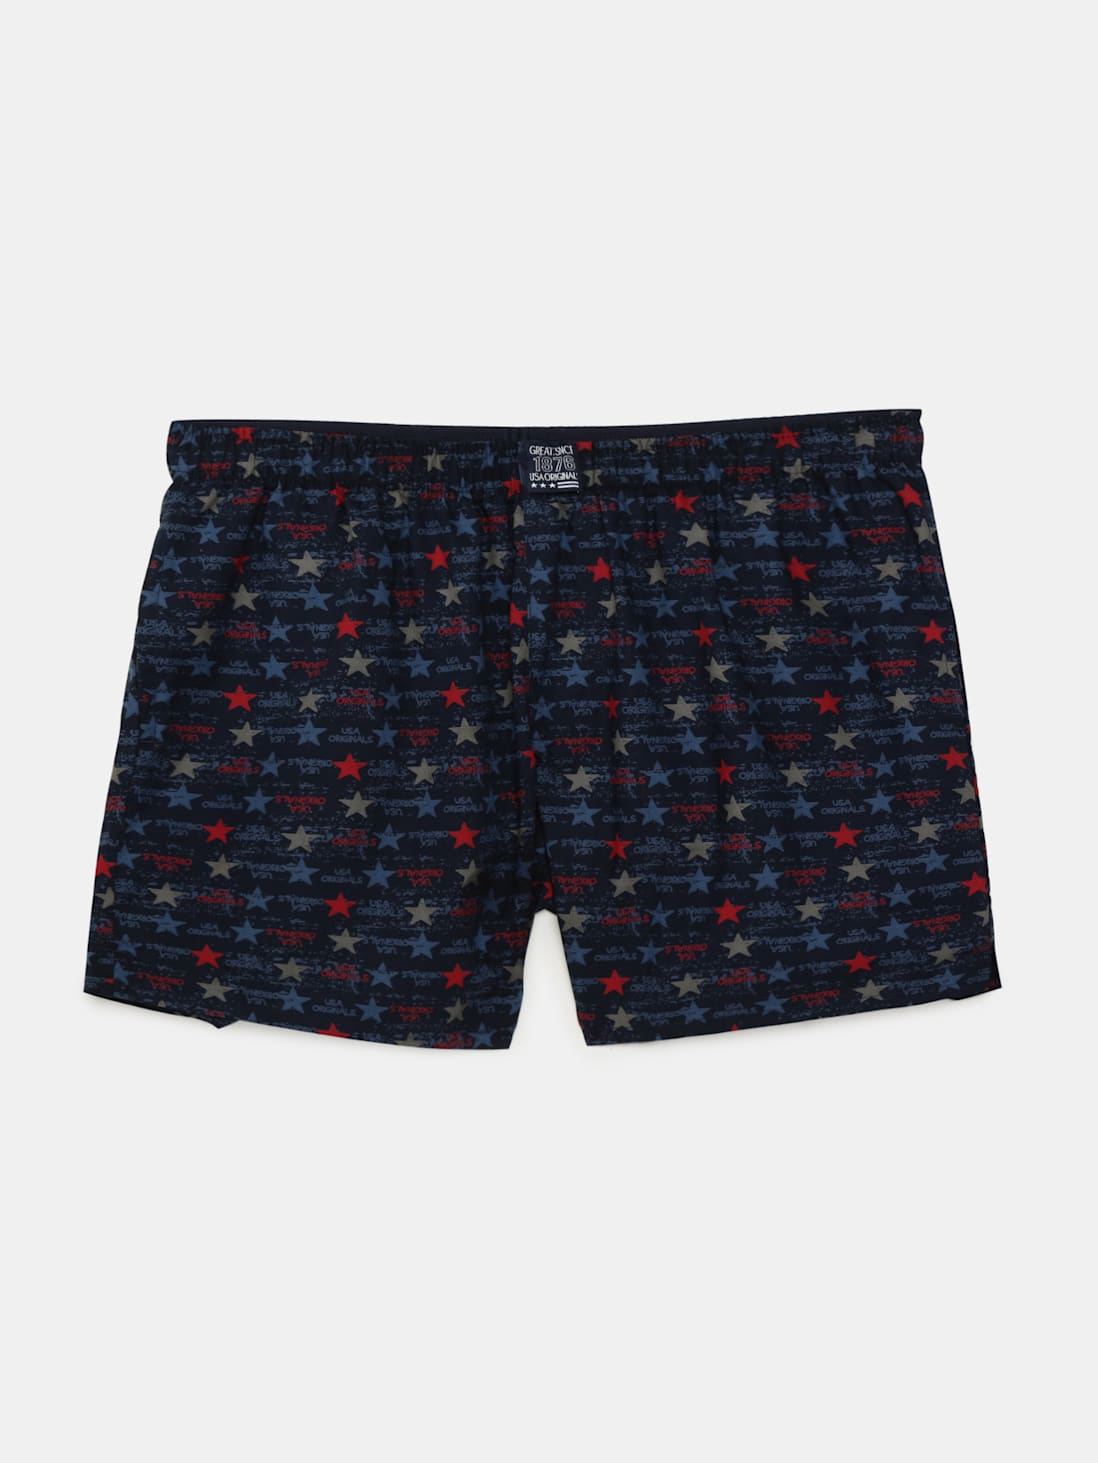 Buy Boy's Super Combed Mercerized Cotton Woven Fabric Printed Boxer ...